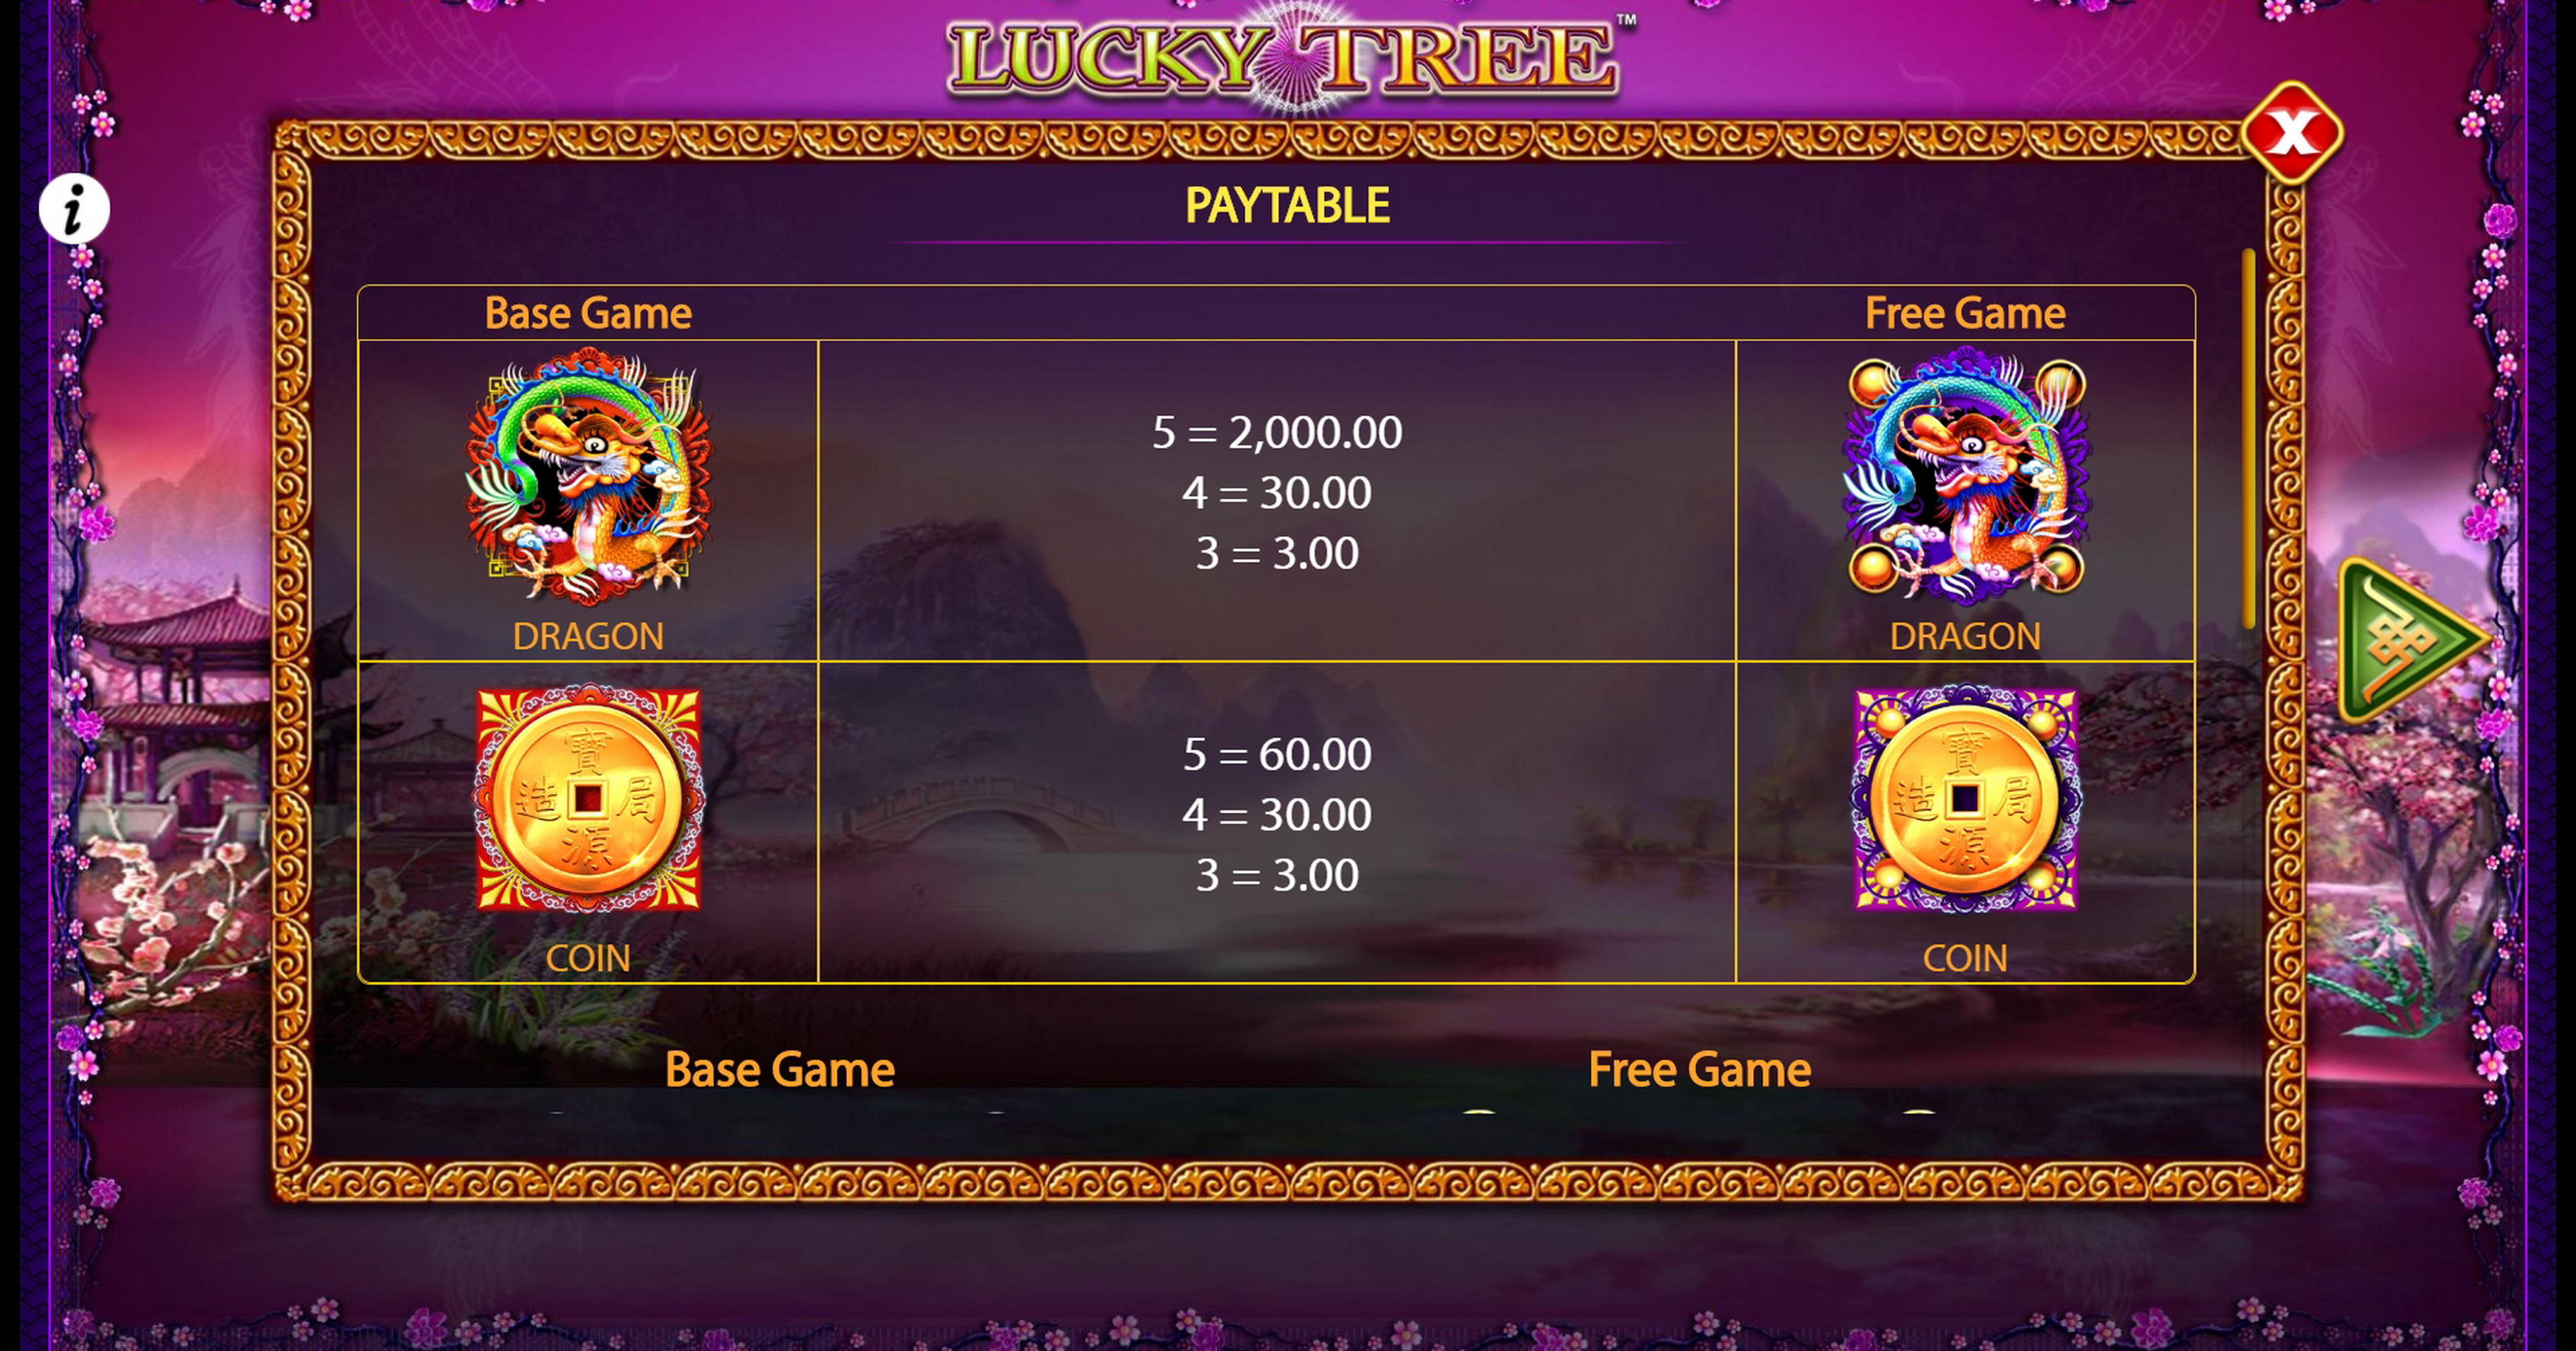 Info of Lucky Tree Slot Game by Bally Technologies